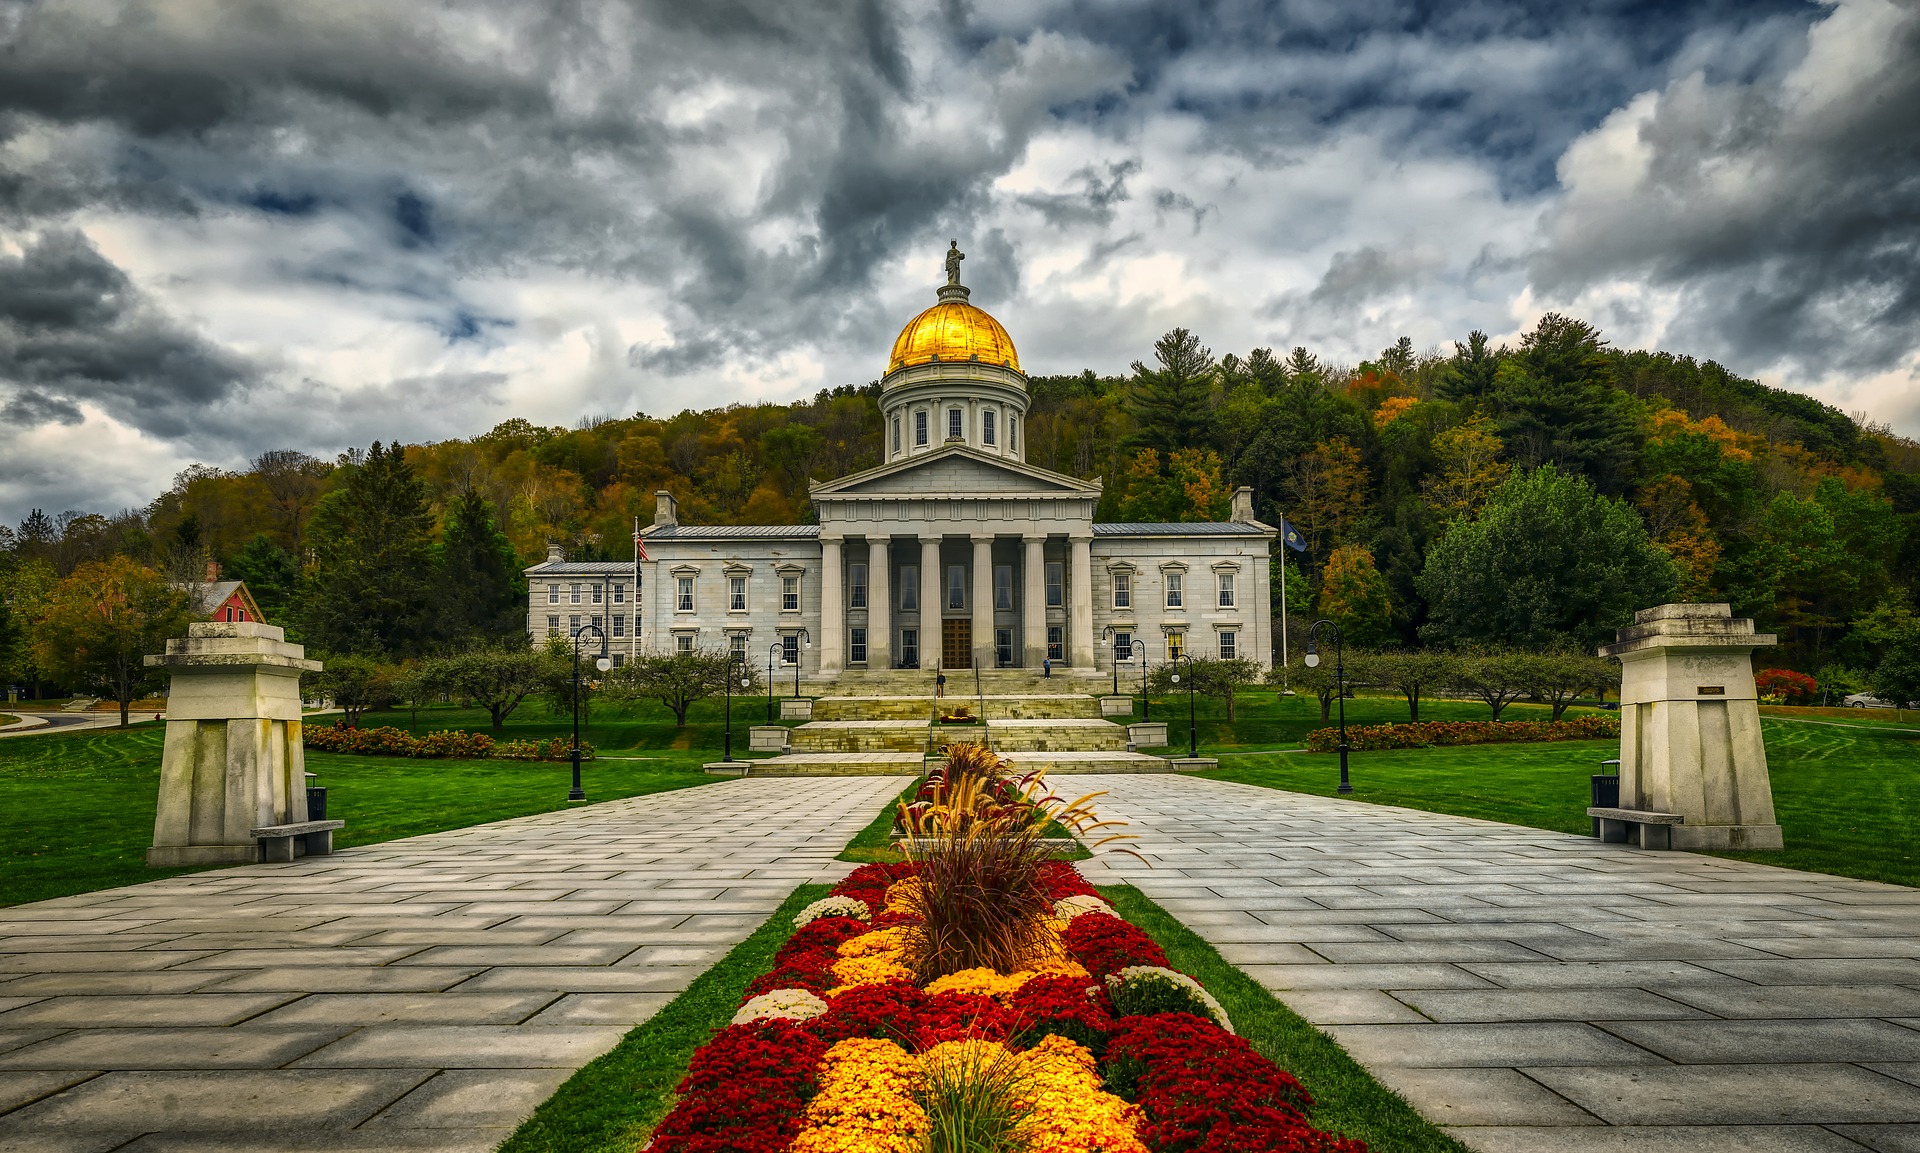 Things to do in Vermont